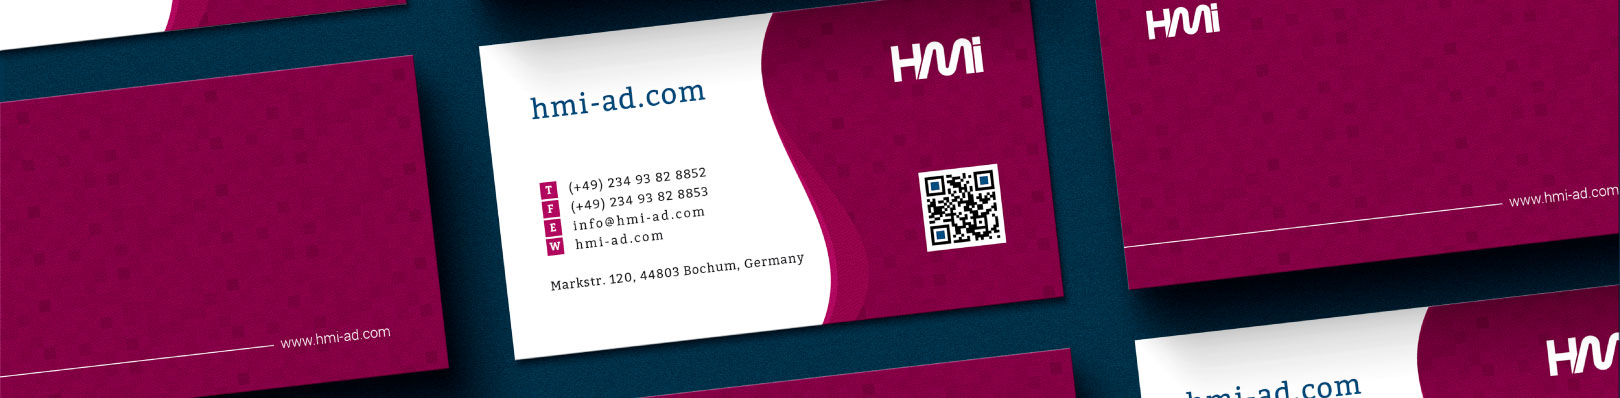 Business card designing in Germany with HMi | Business card printing in Dusseldorf_Business card Design and printing in Germany with HMi